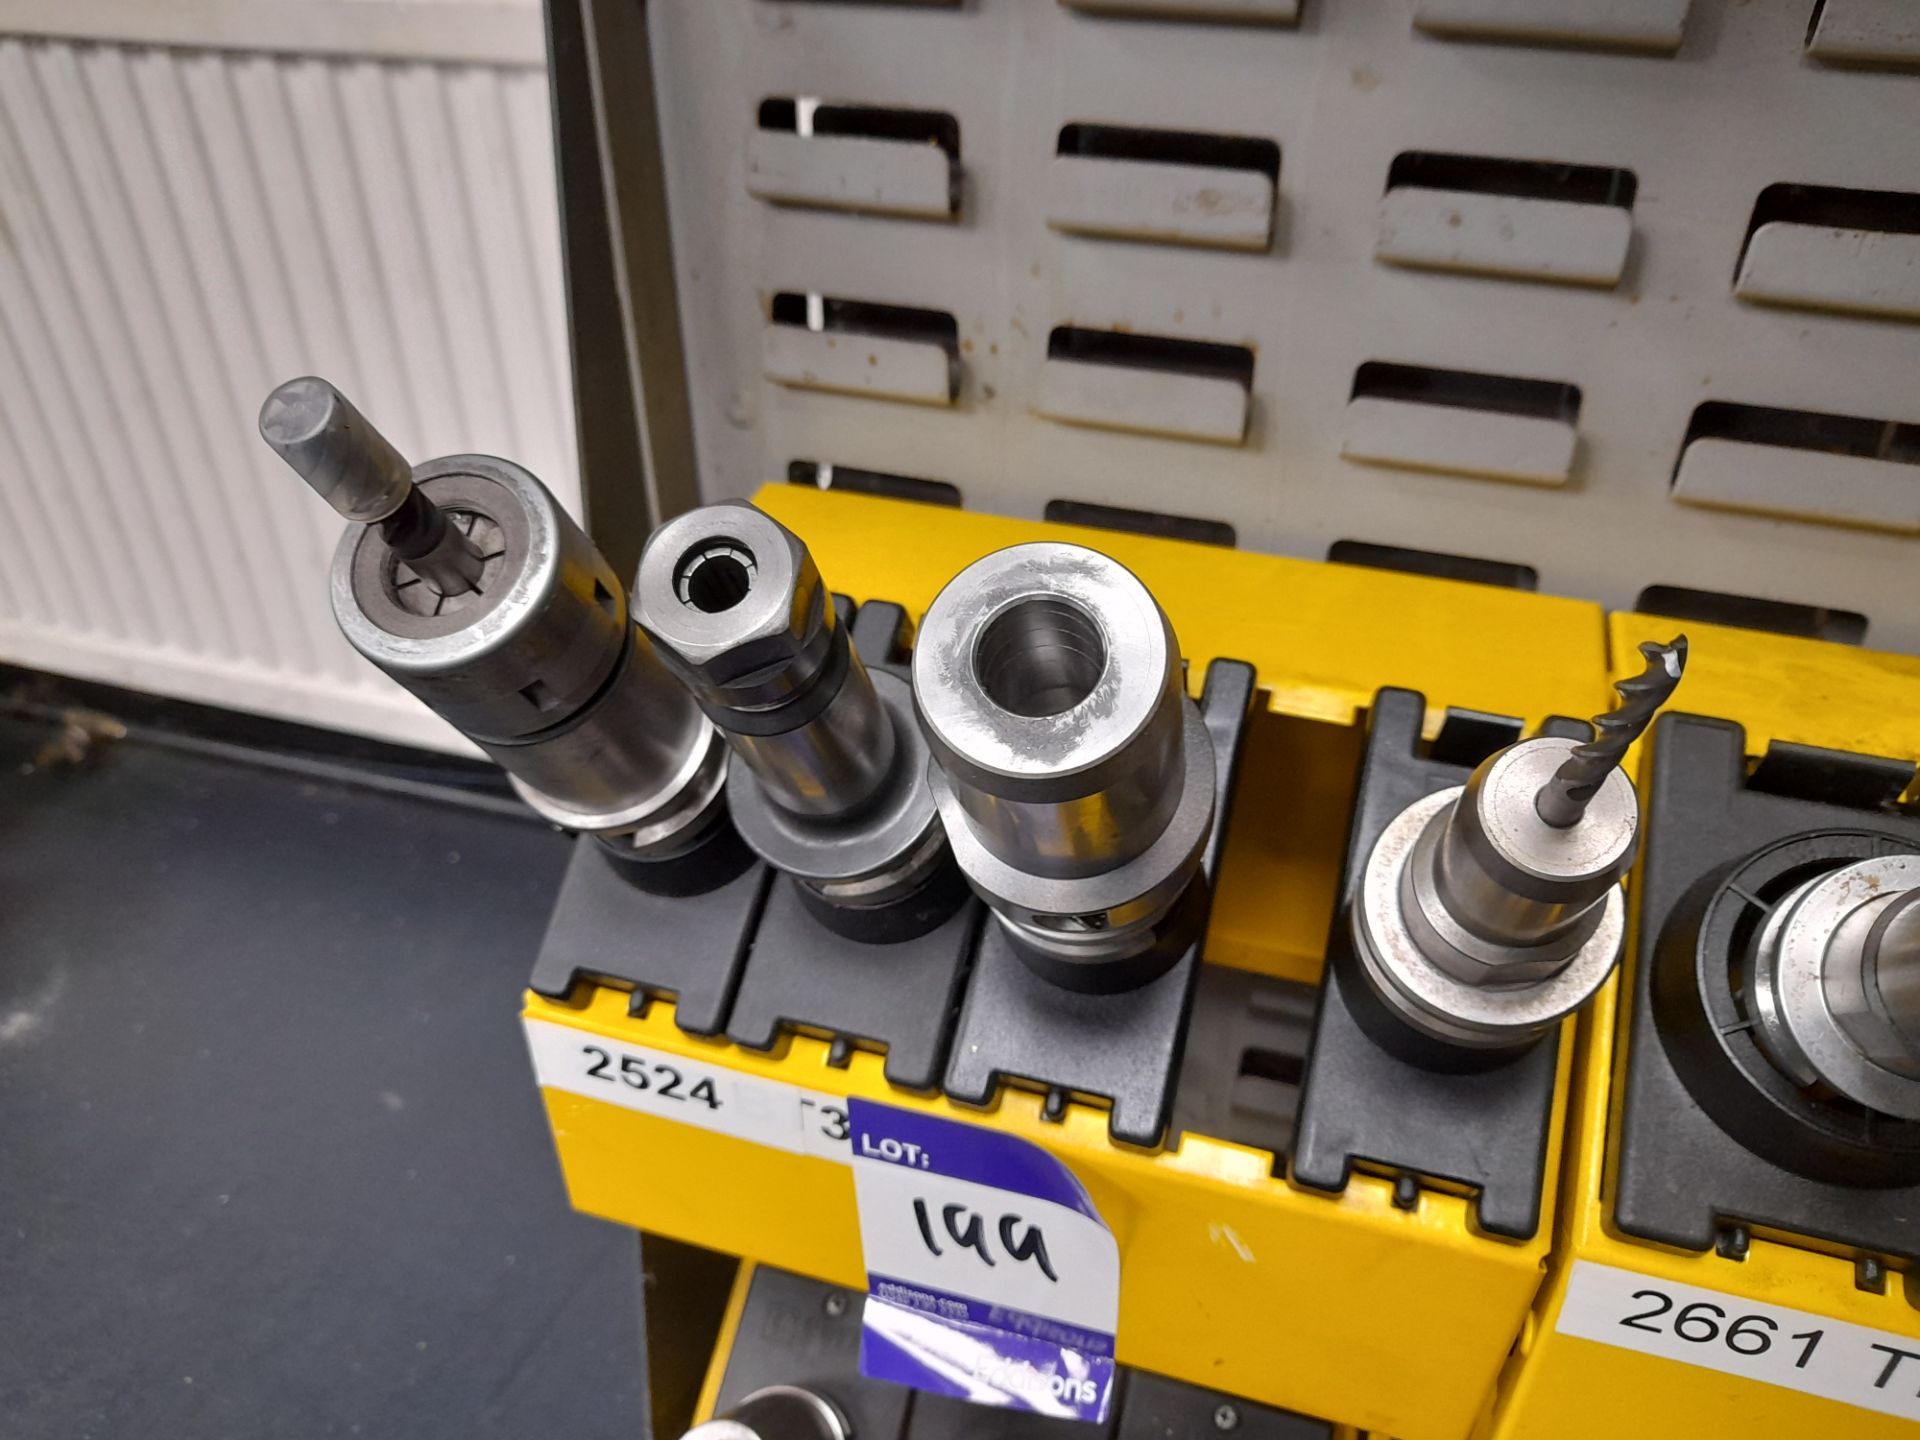 9 x Various BT30 CNC tool holders, with various tools, to yellow holder (rack not included) - Image 4 of 4